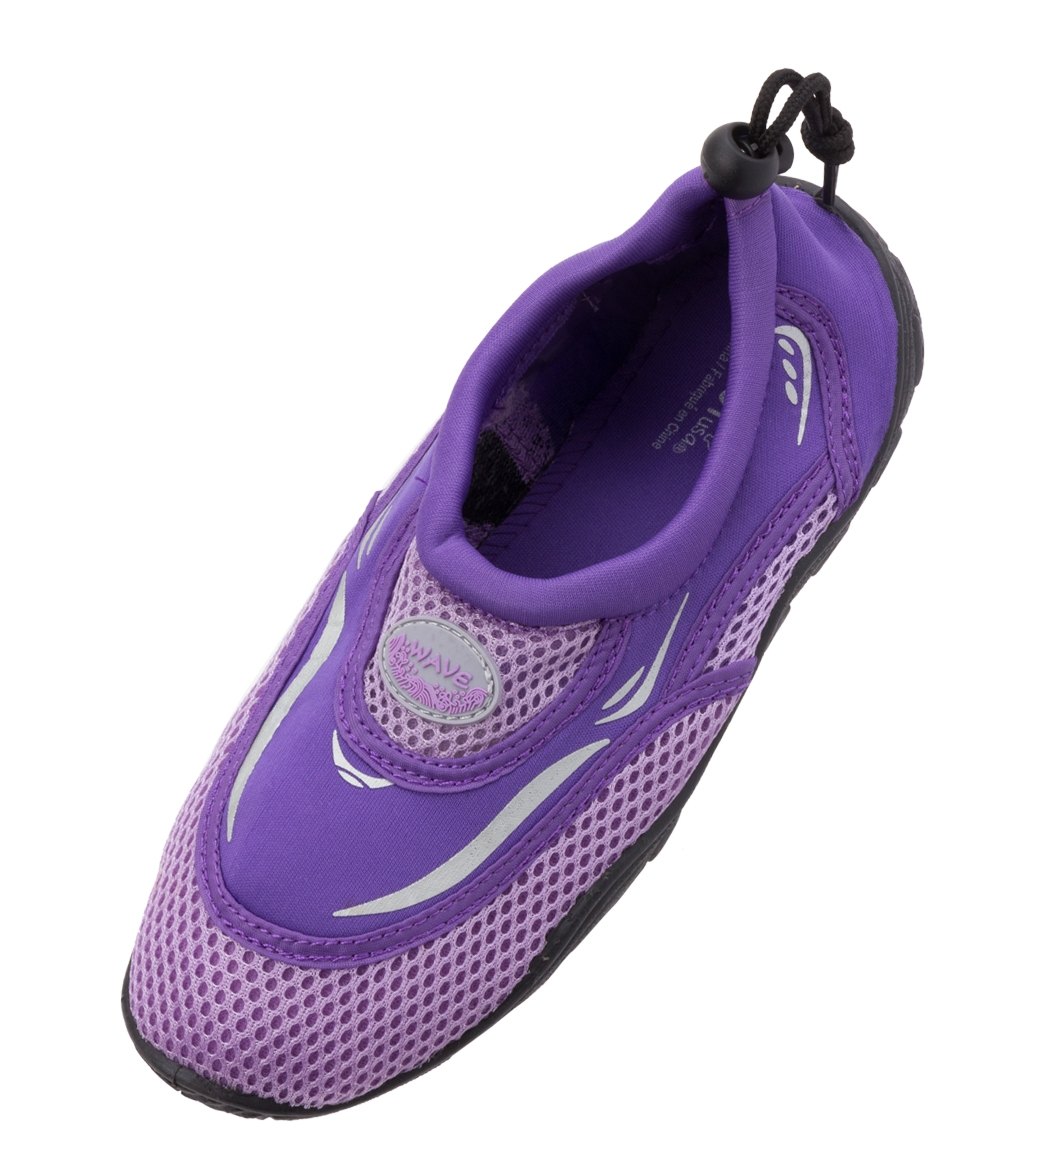 Easy USA Womens Mesh Top Water Shoes